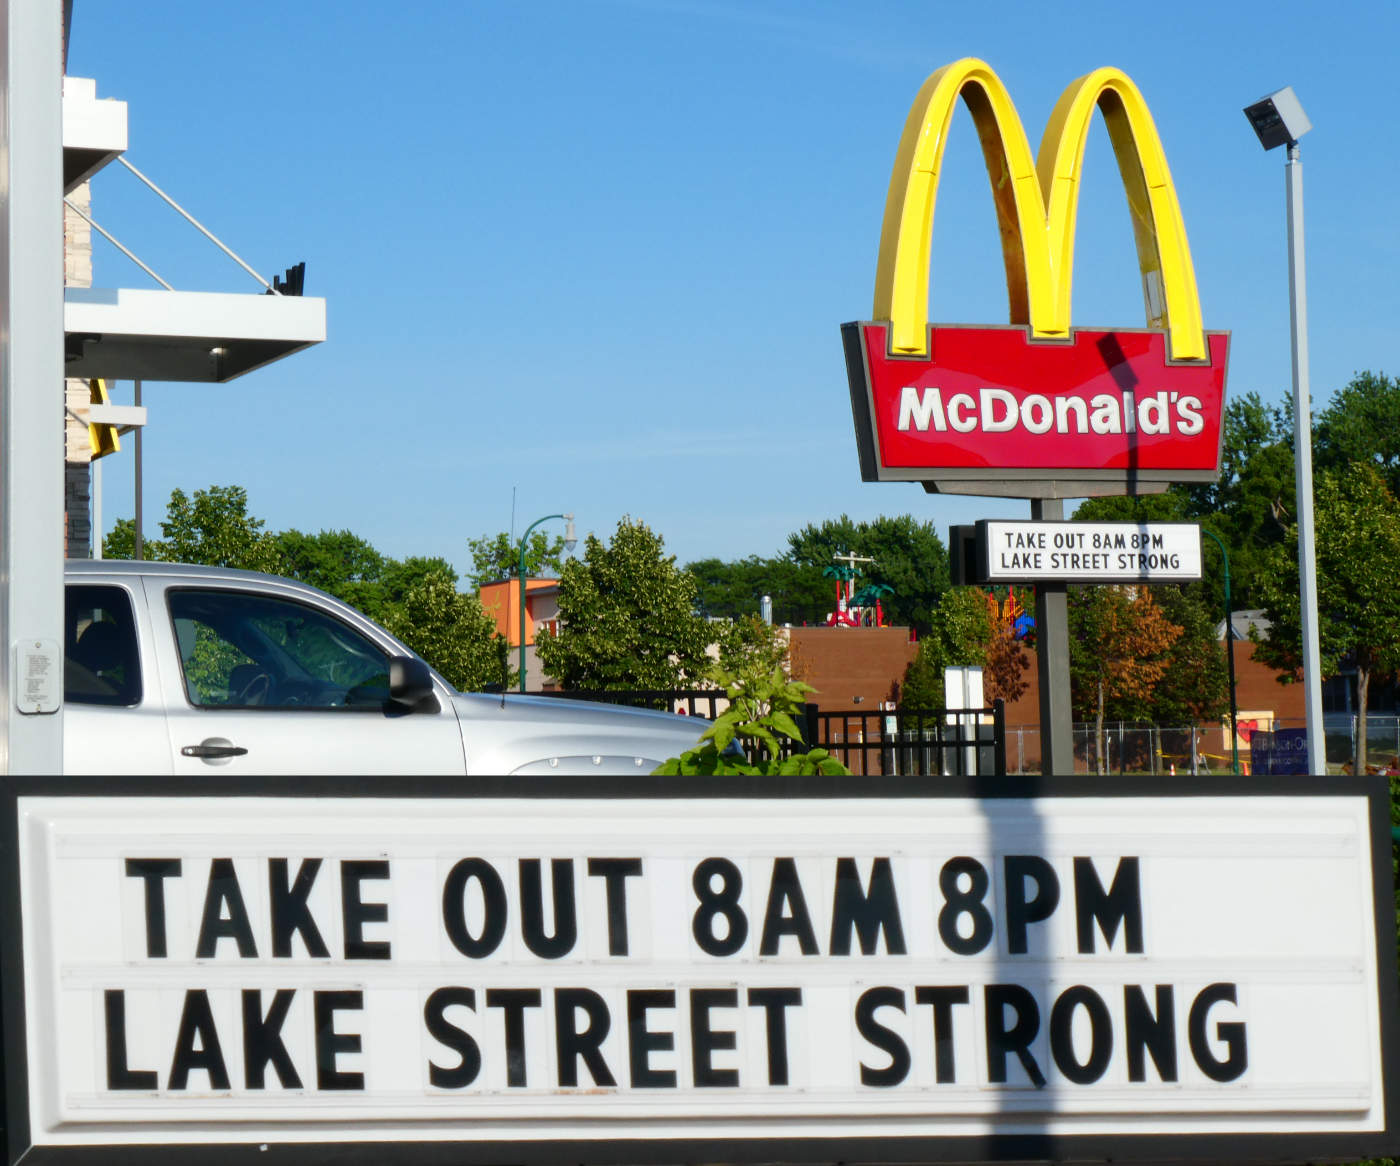 McDonalds street sign with golden arches and sign reading: Take out 8am 8pm - Lake Street Strong